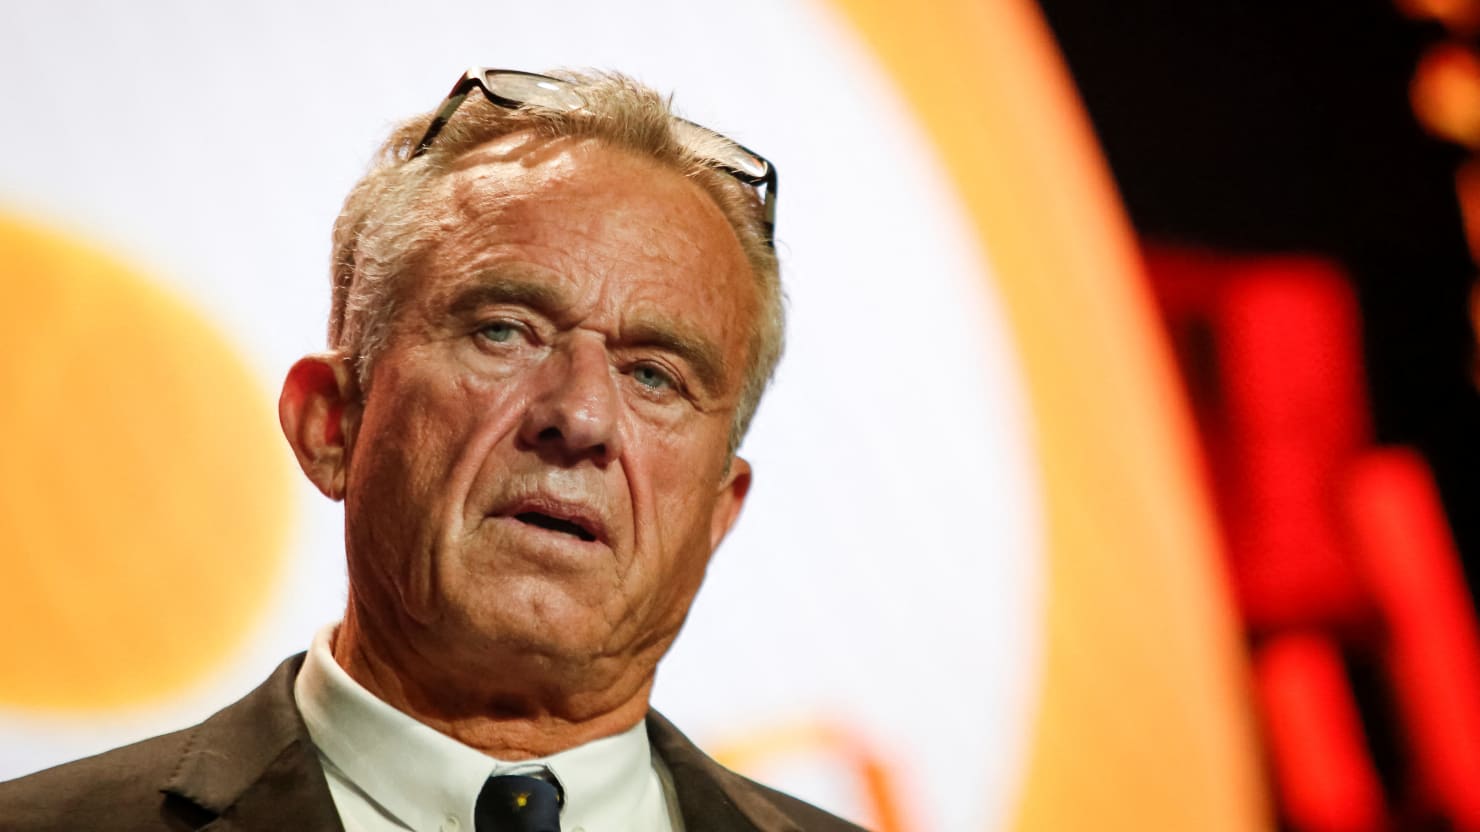 Michelle Vargas Sex - NewsNation to Host RFK Jr. Town Hall Amid Anti-Vax Controversy